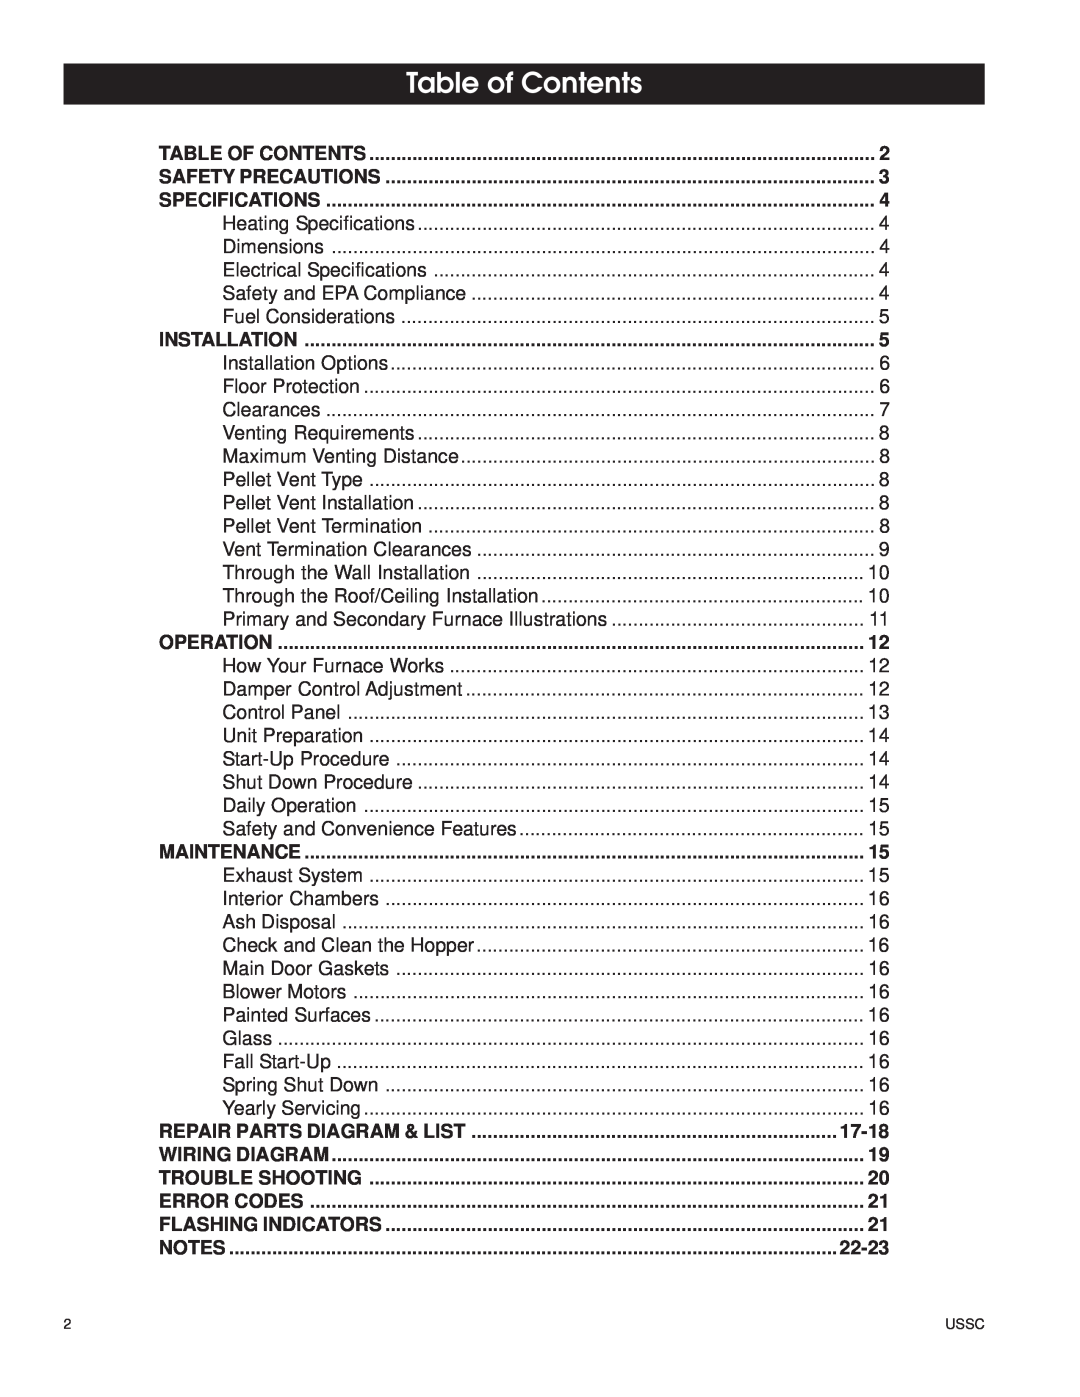 United States Stove 6100 owner manual Table of Contents, Repair Parts Diagram & List, 17-18, 22-23 